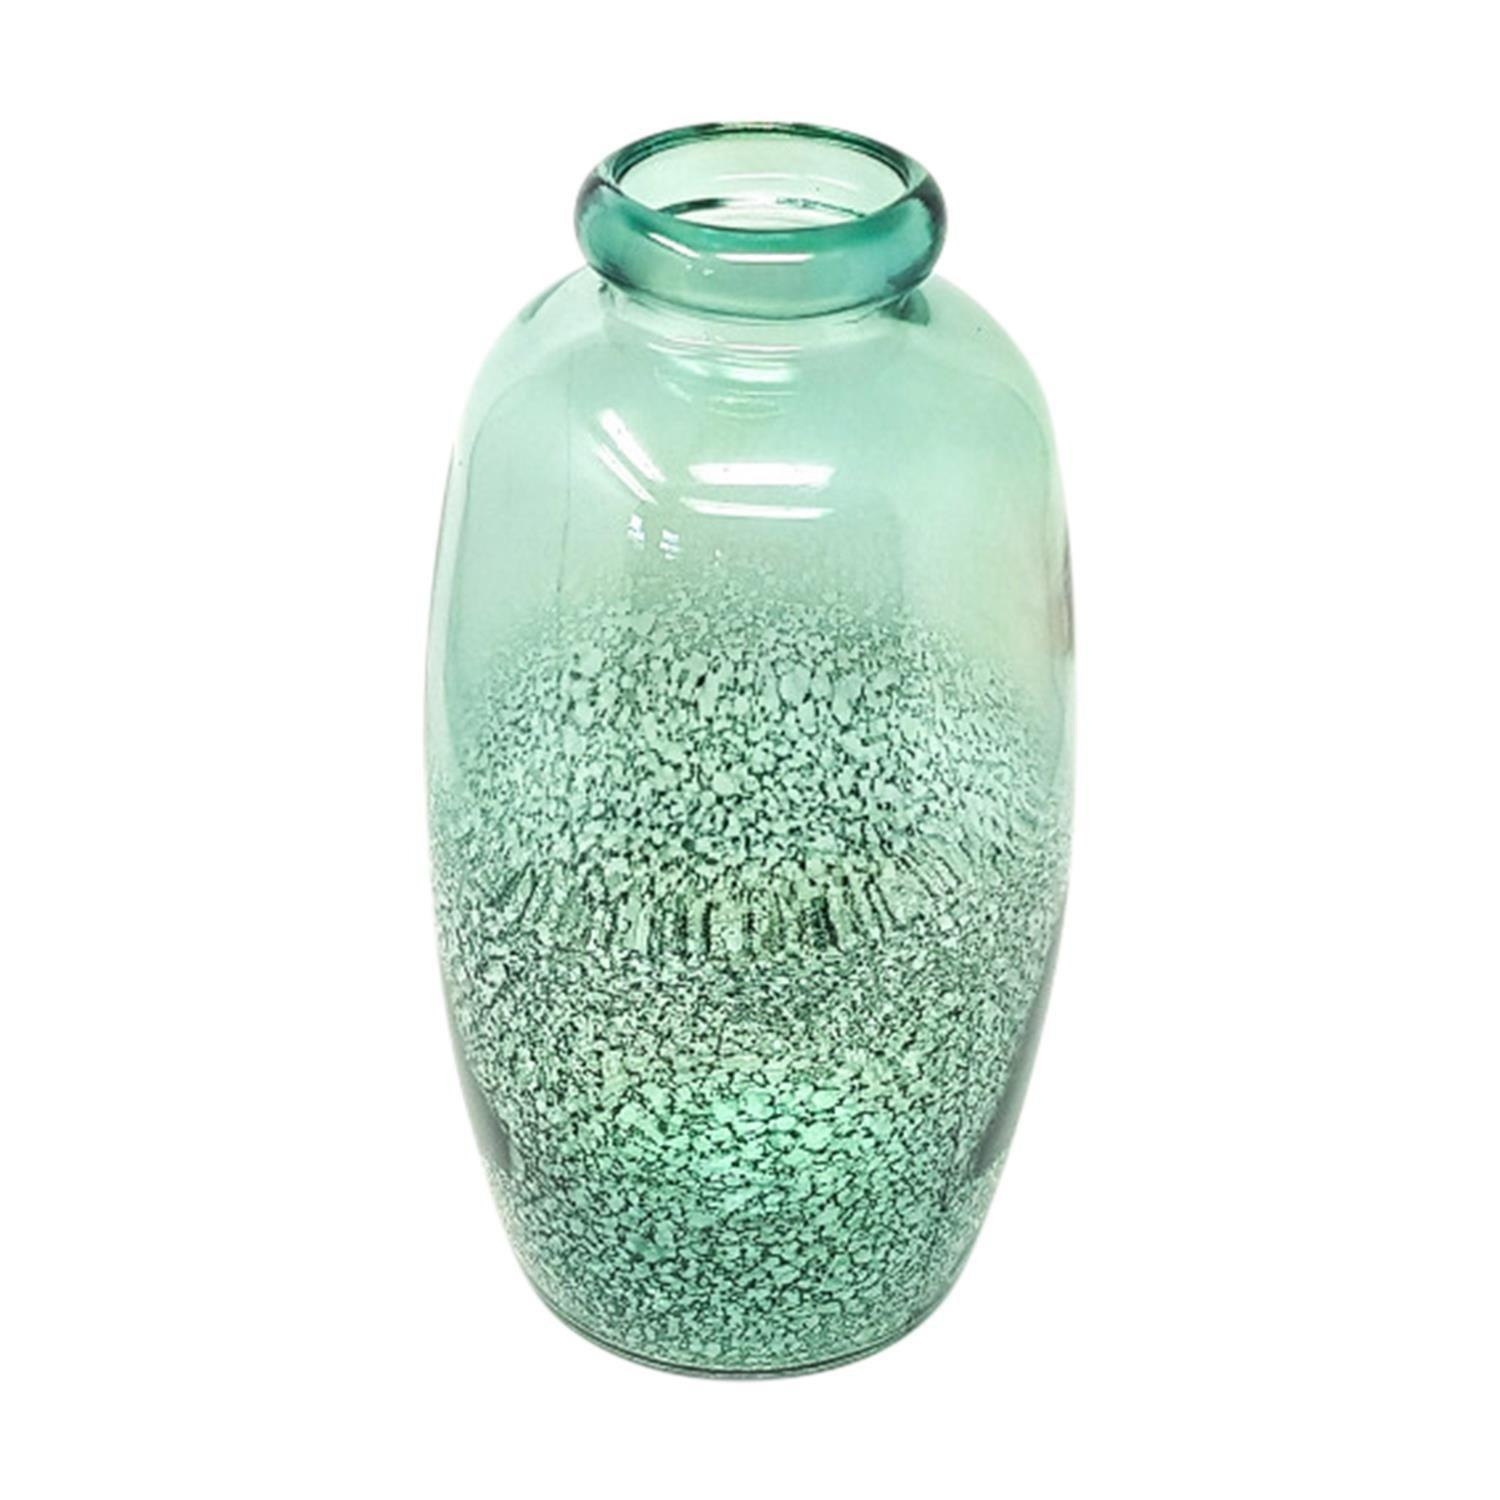 Recycled Glass Rimma Clear Home Décor Medium Teardrop Vase (H) 35cm - image 1